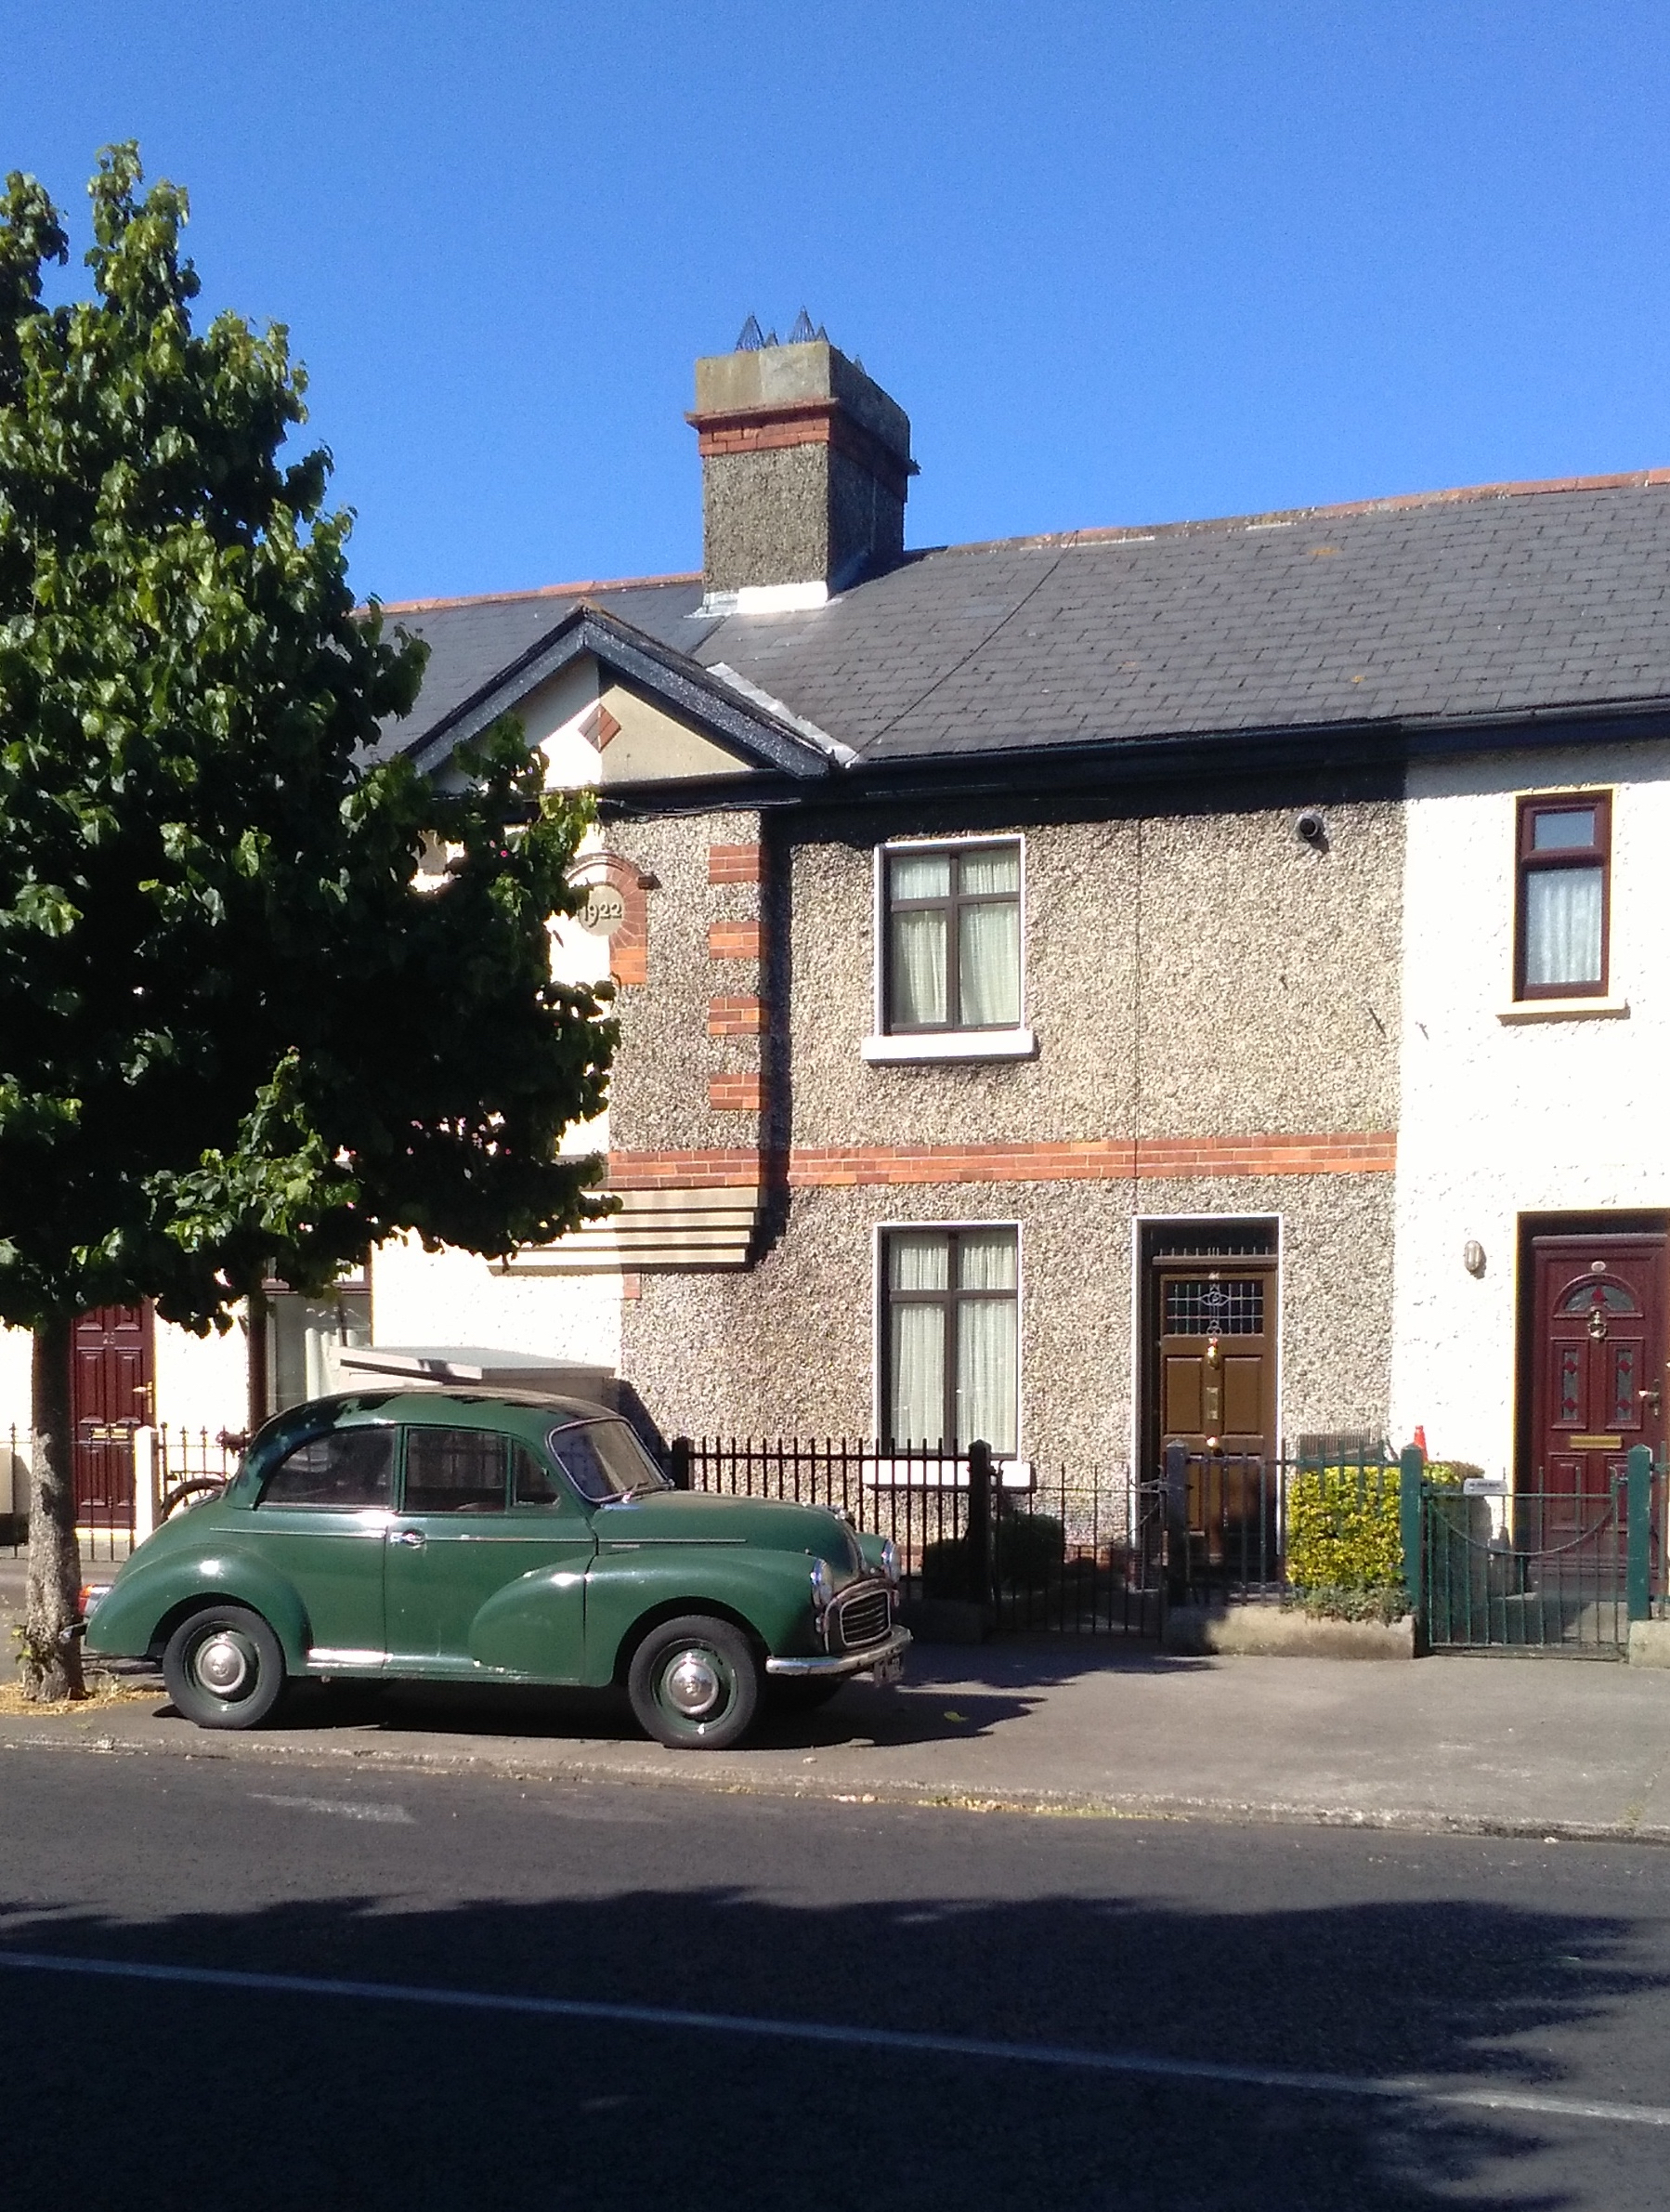 Street view of two storey house with chimney and a green vintage car in the front